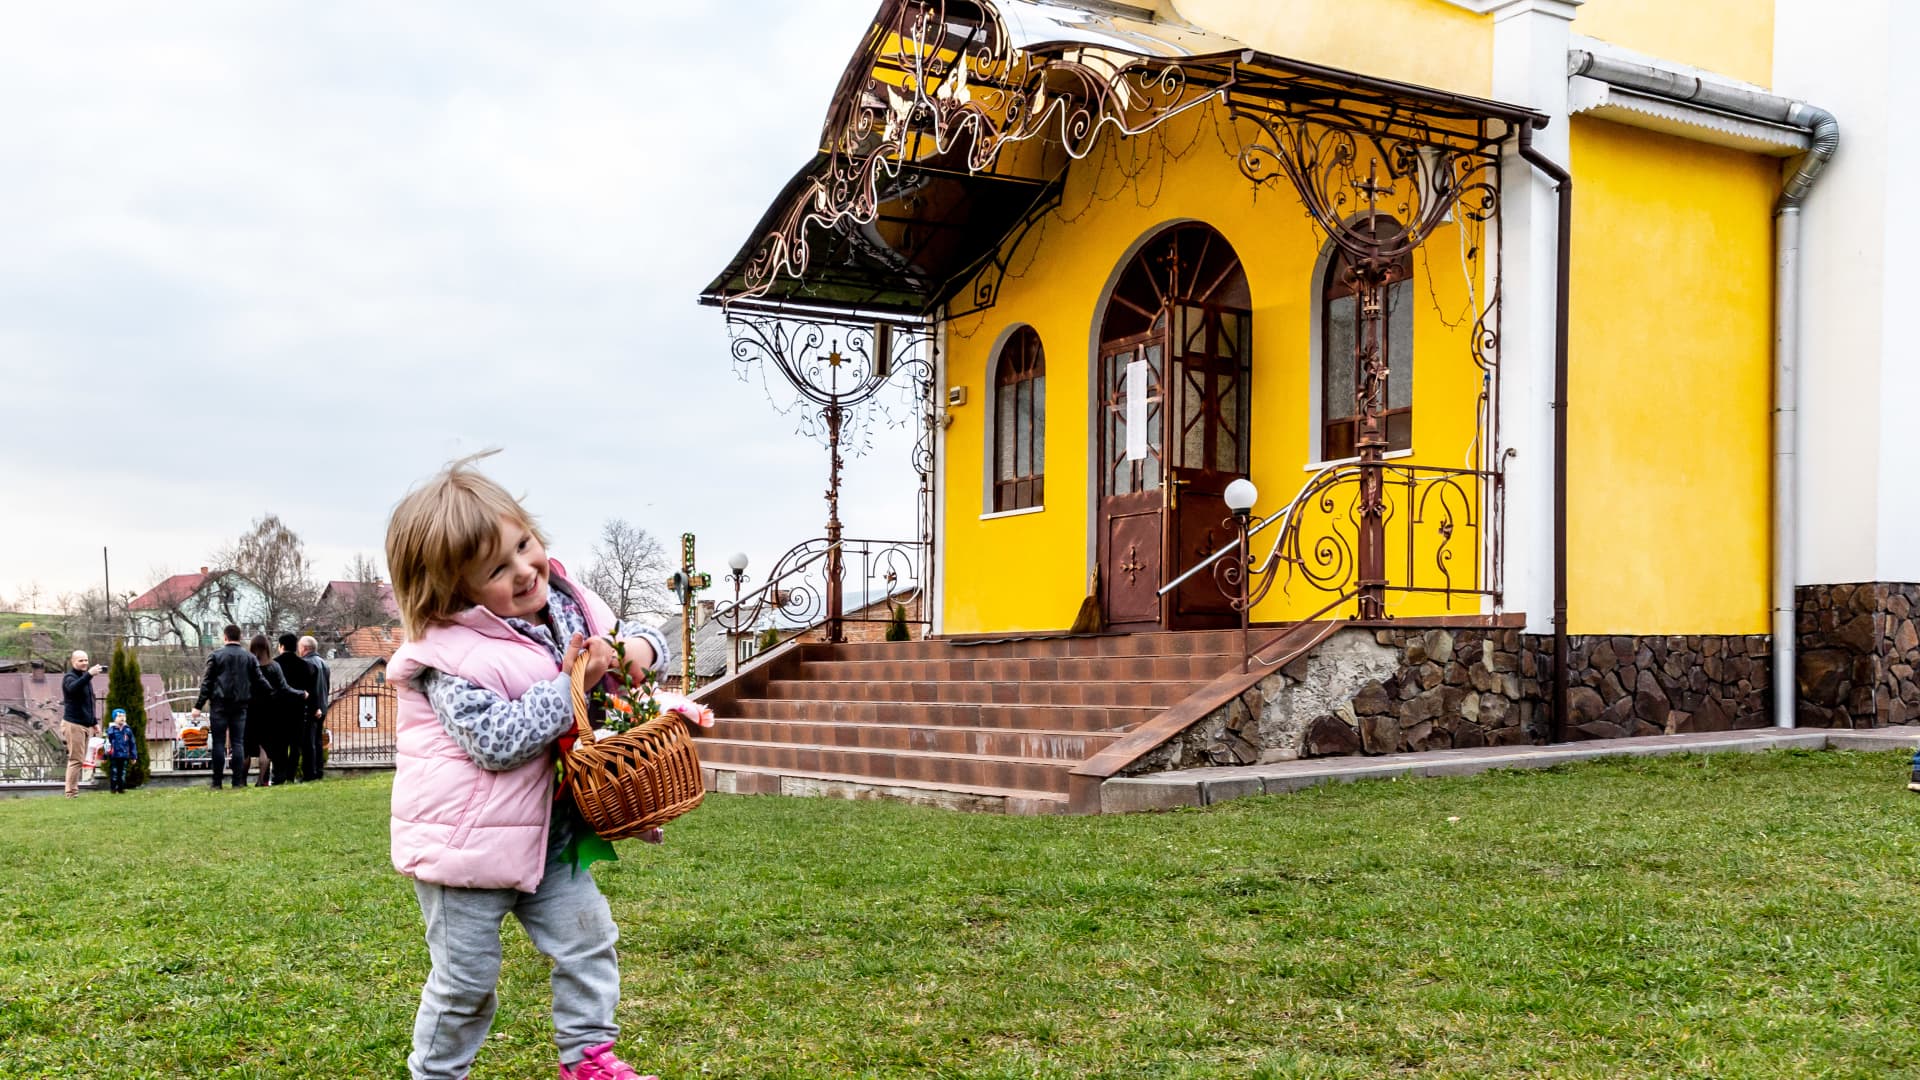 Many have been internally displaced and are taking temporary shelter at the Greek Catholic church in Nadyby, Lviv. Seen here is a young Ukrainian girl from Donetsk skipping along with her Easter food basket in front of the church.